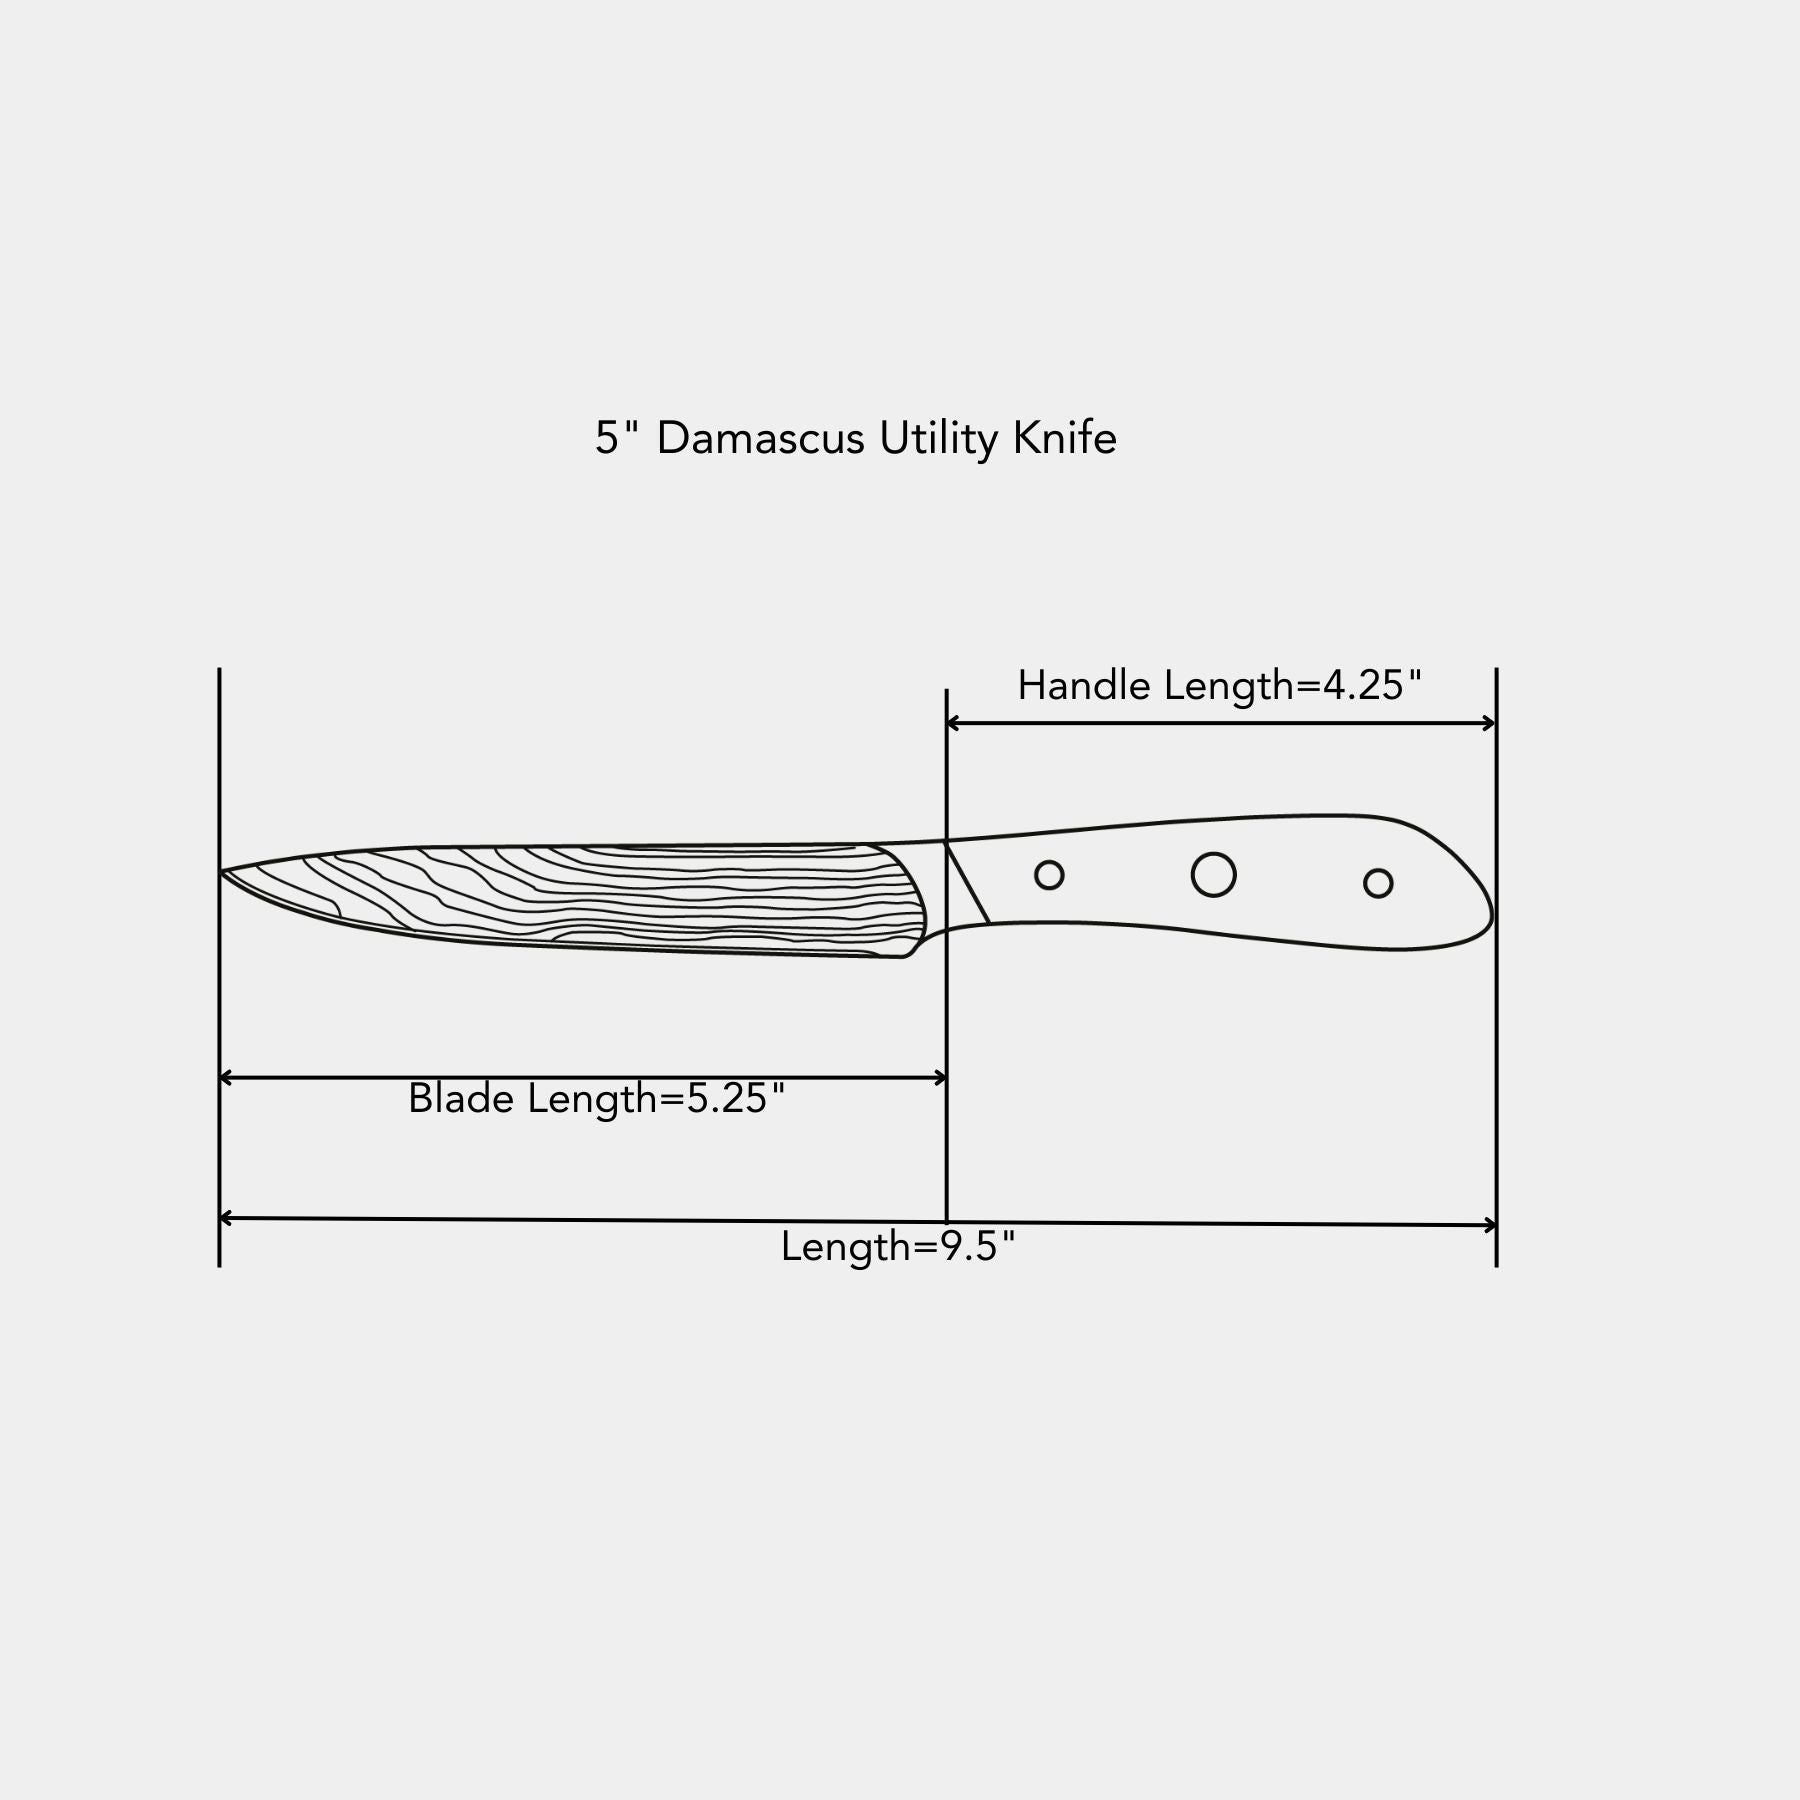 5" Damascus Utility Knife dimensions of blade and handle length